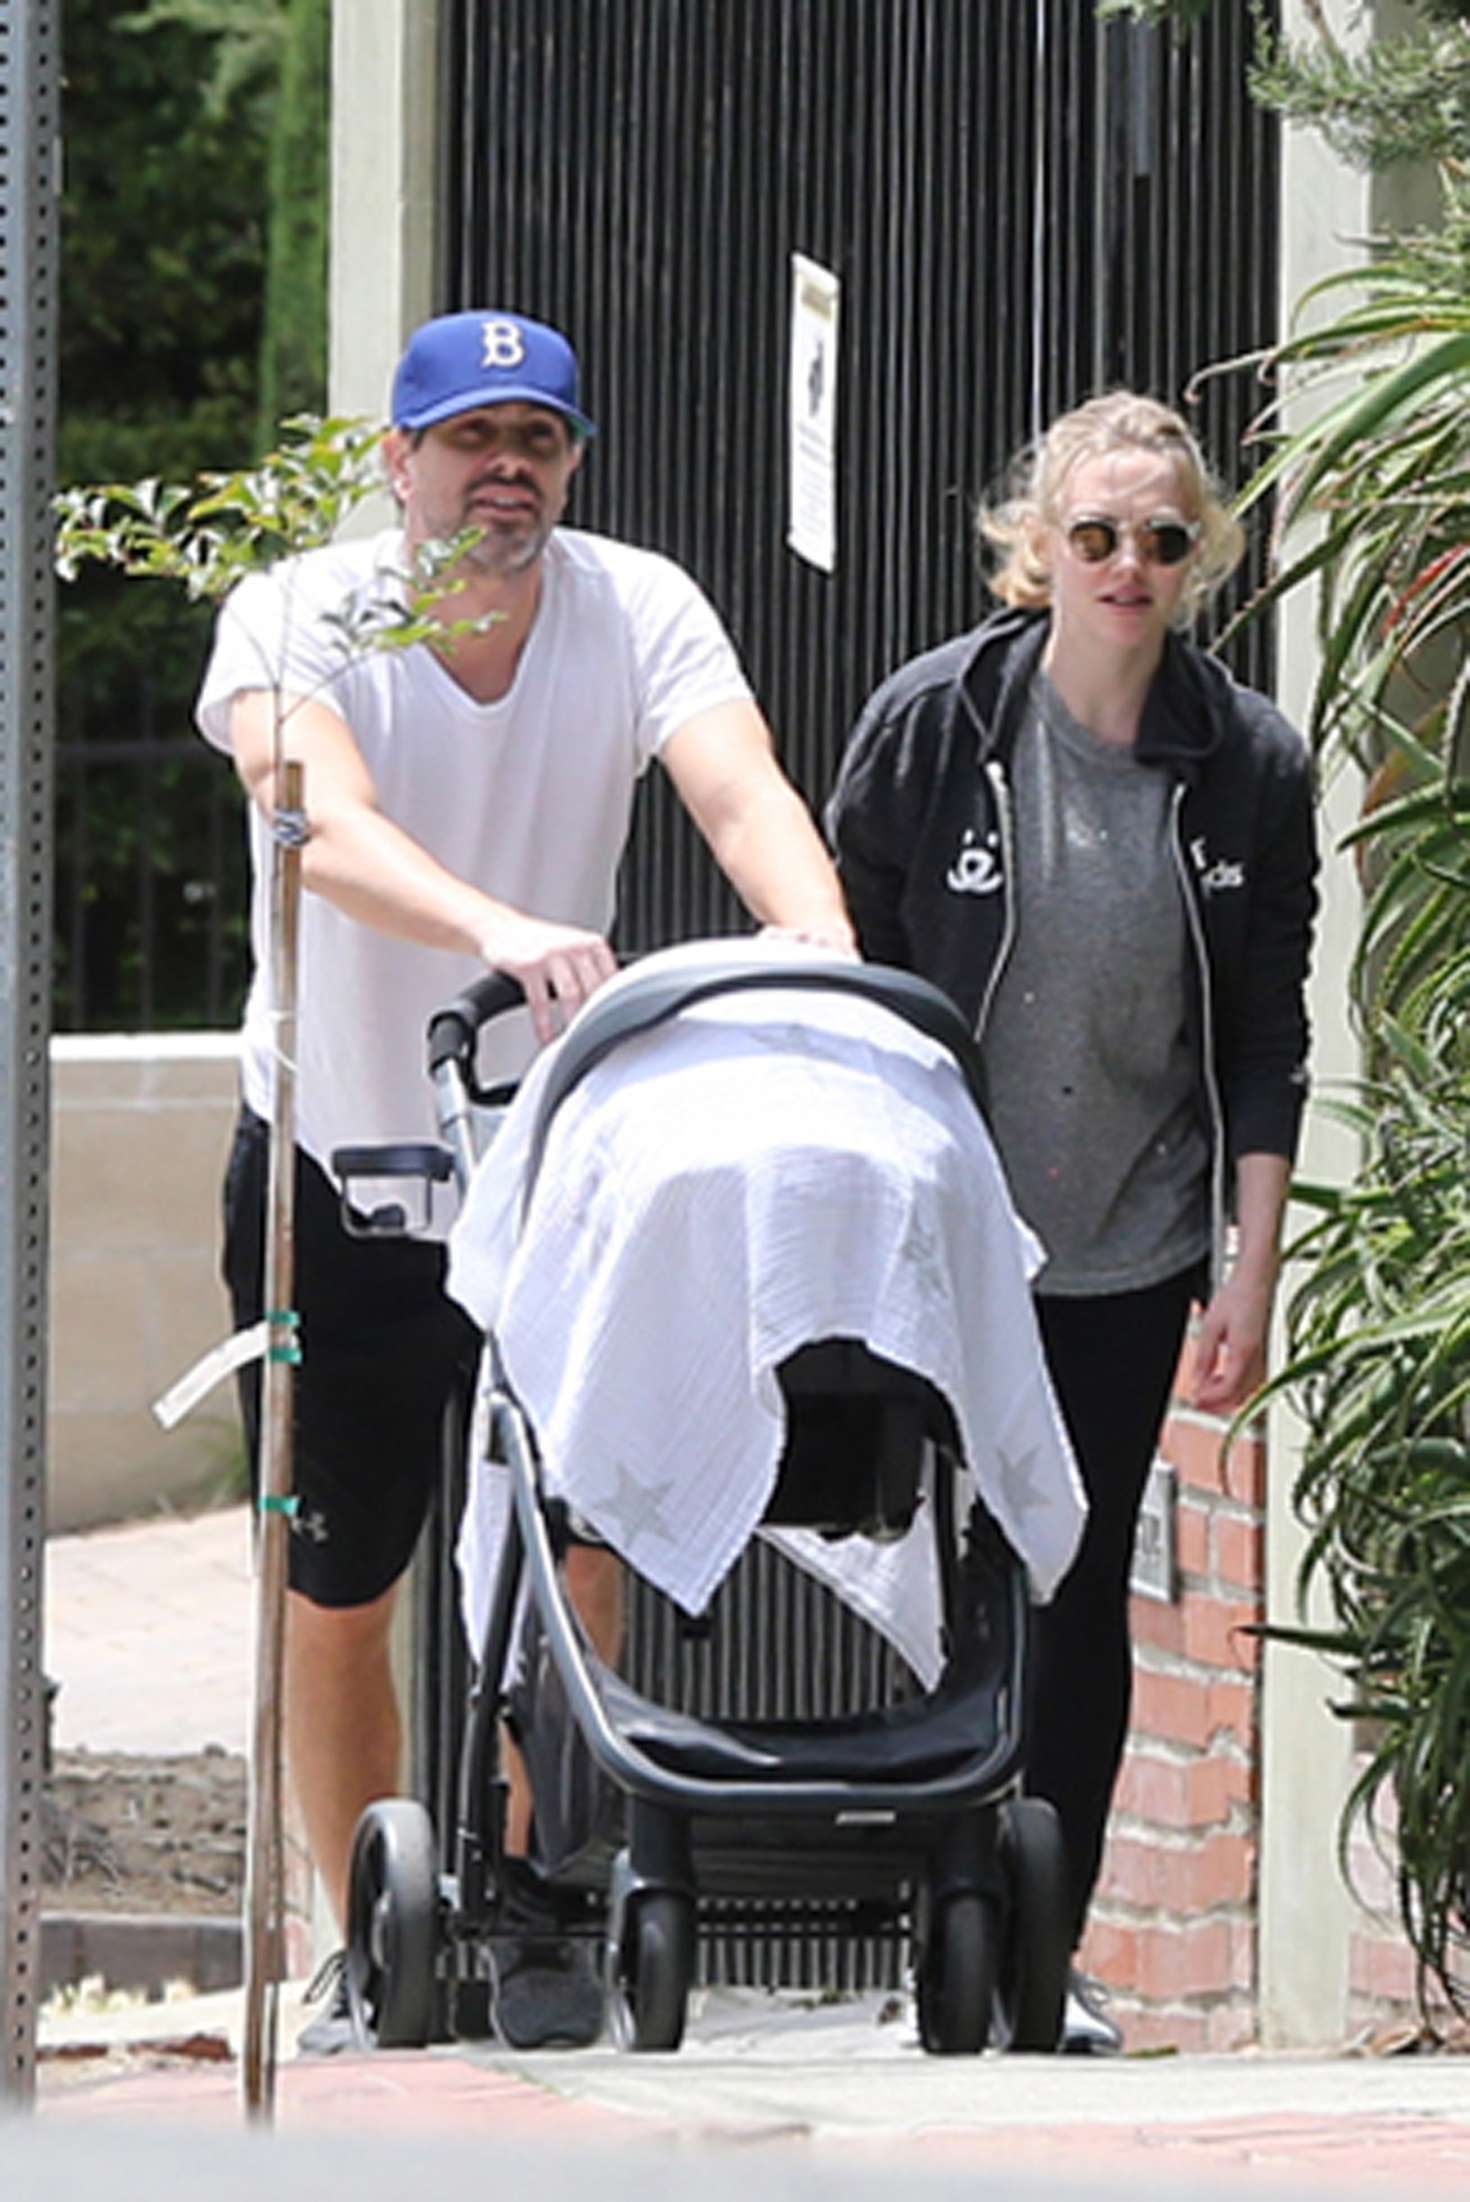 Amanda Seyfried with her family out in Los Angeles